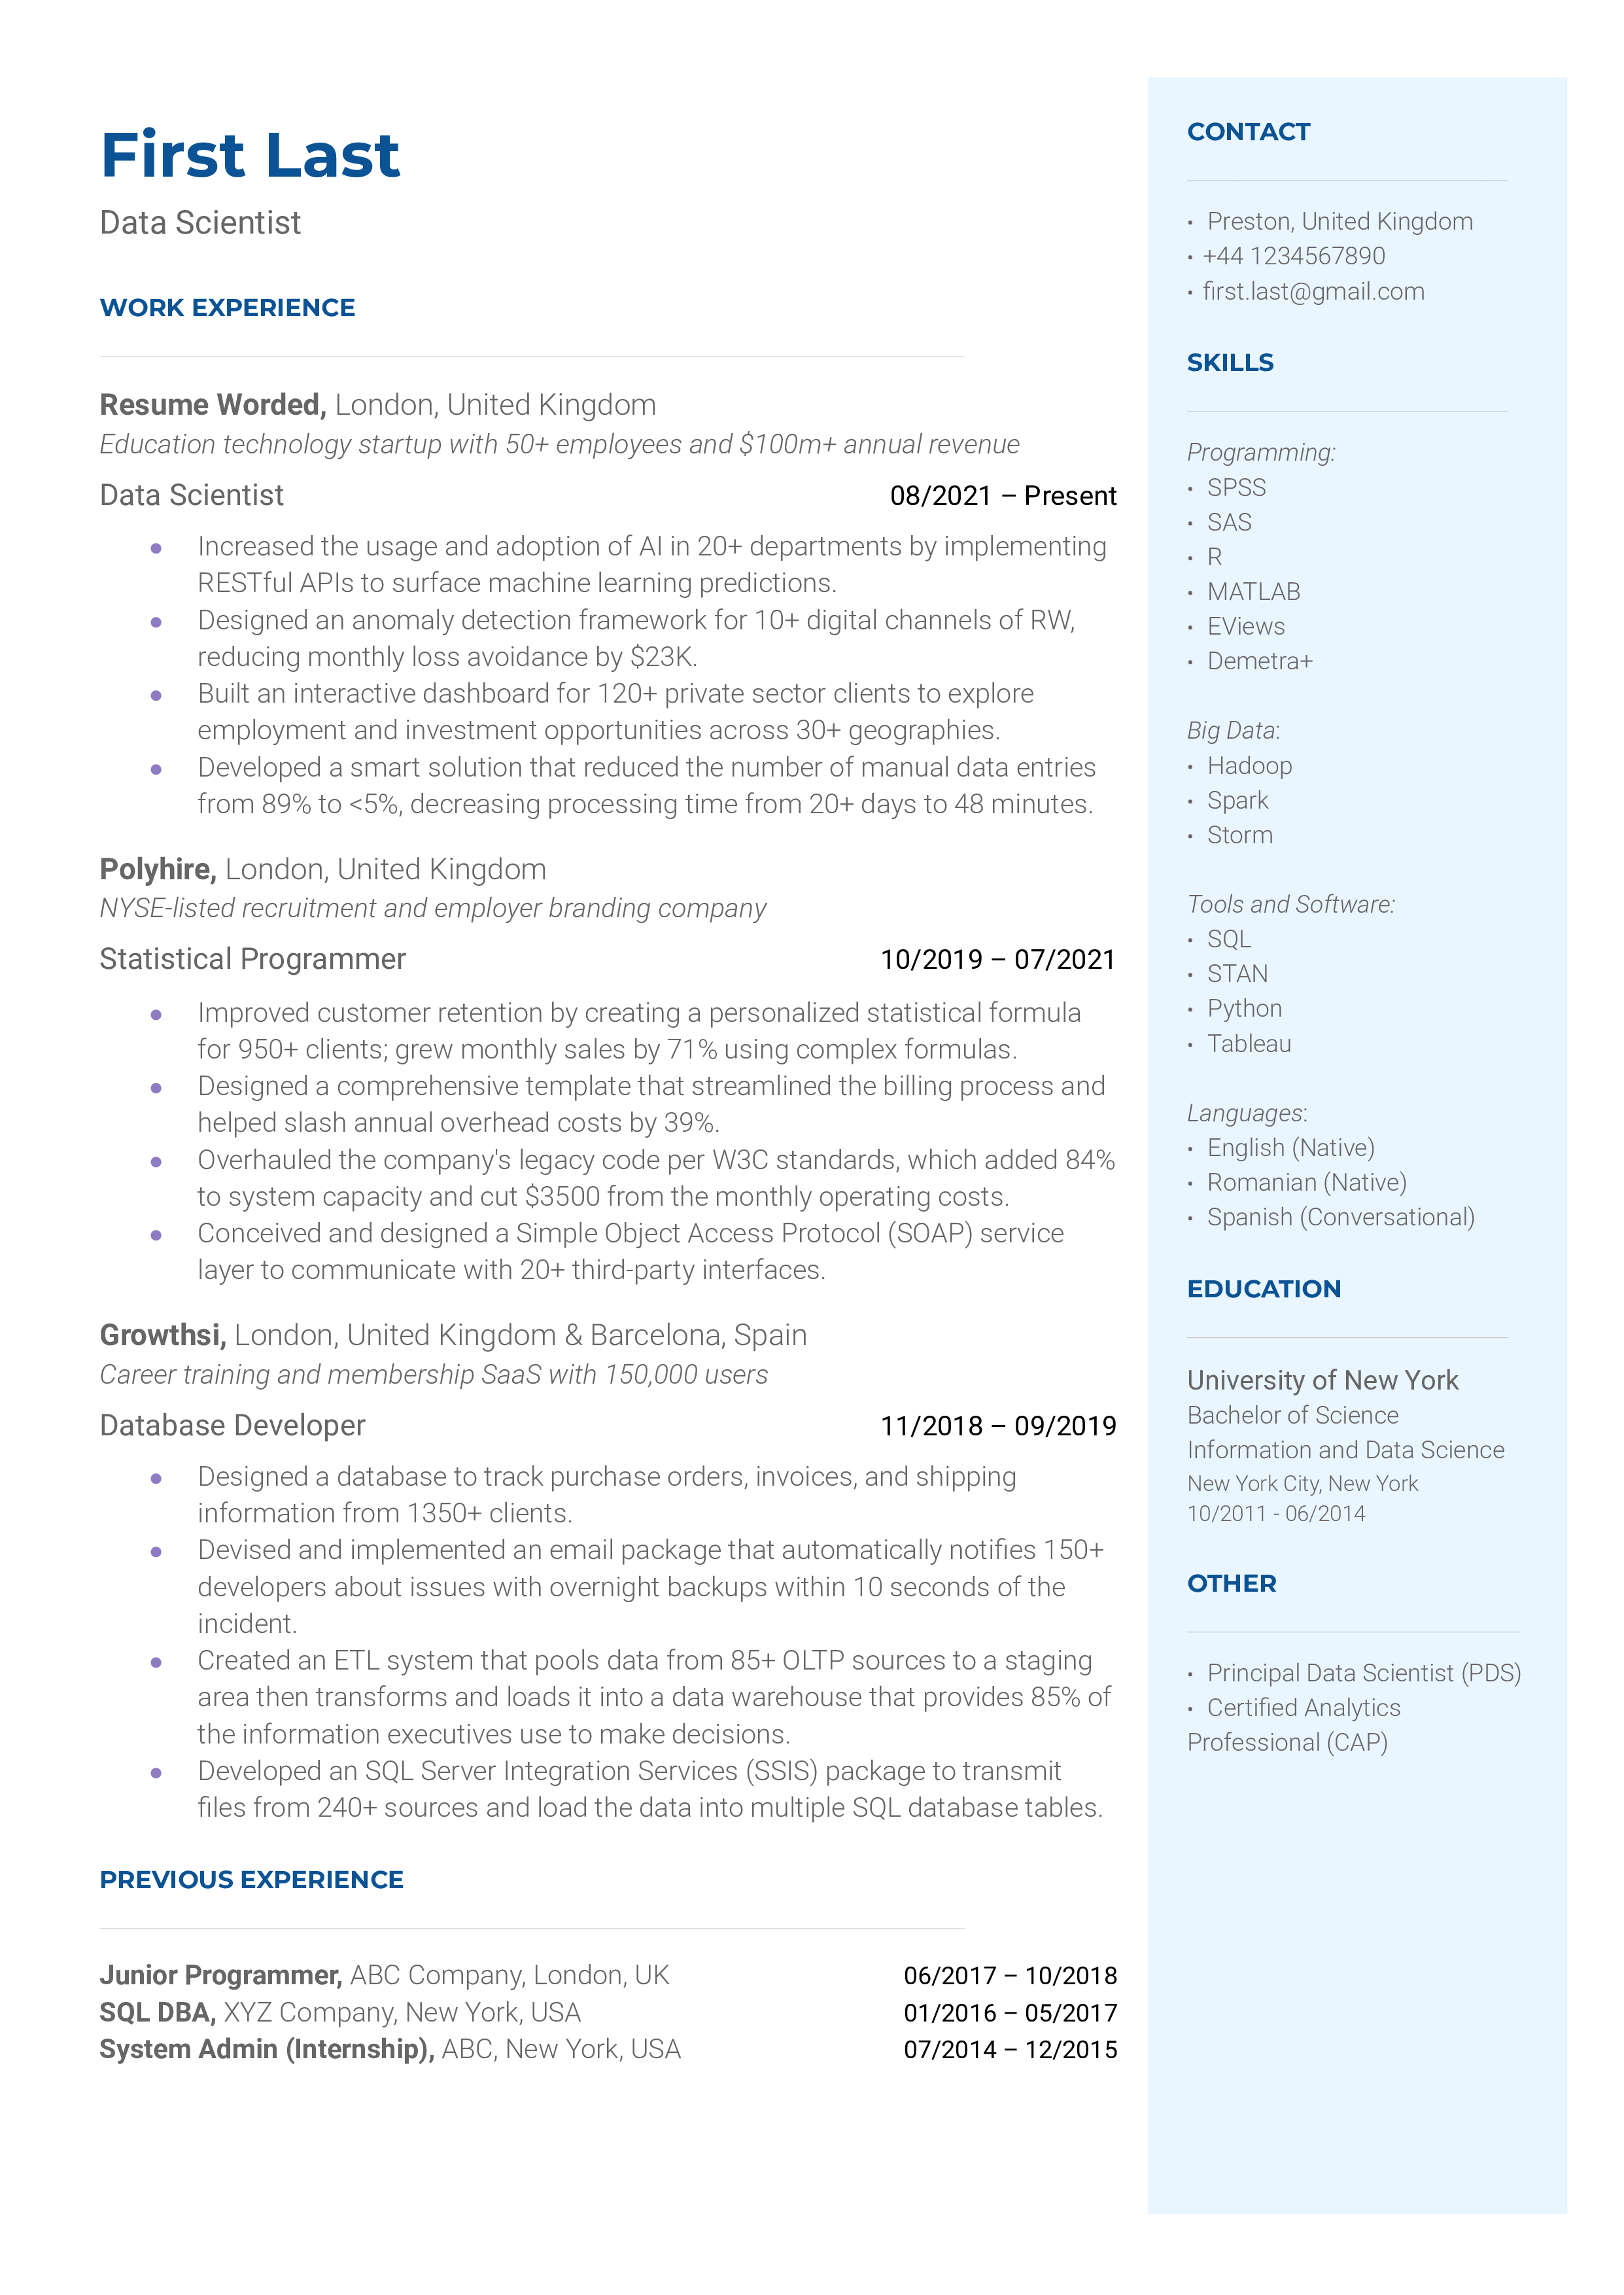 A screenshot of a data scientist's CV highlighting their technical and business skills.